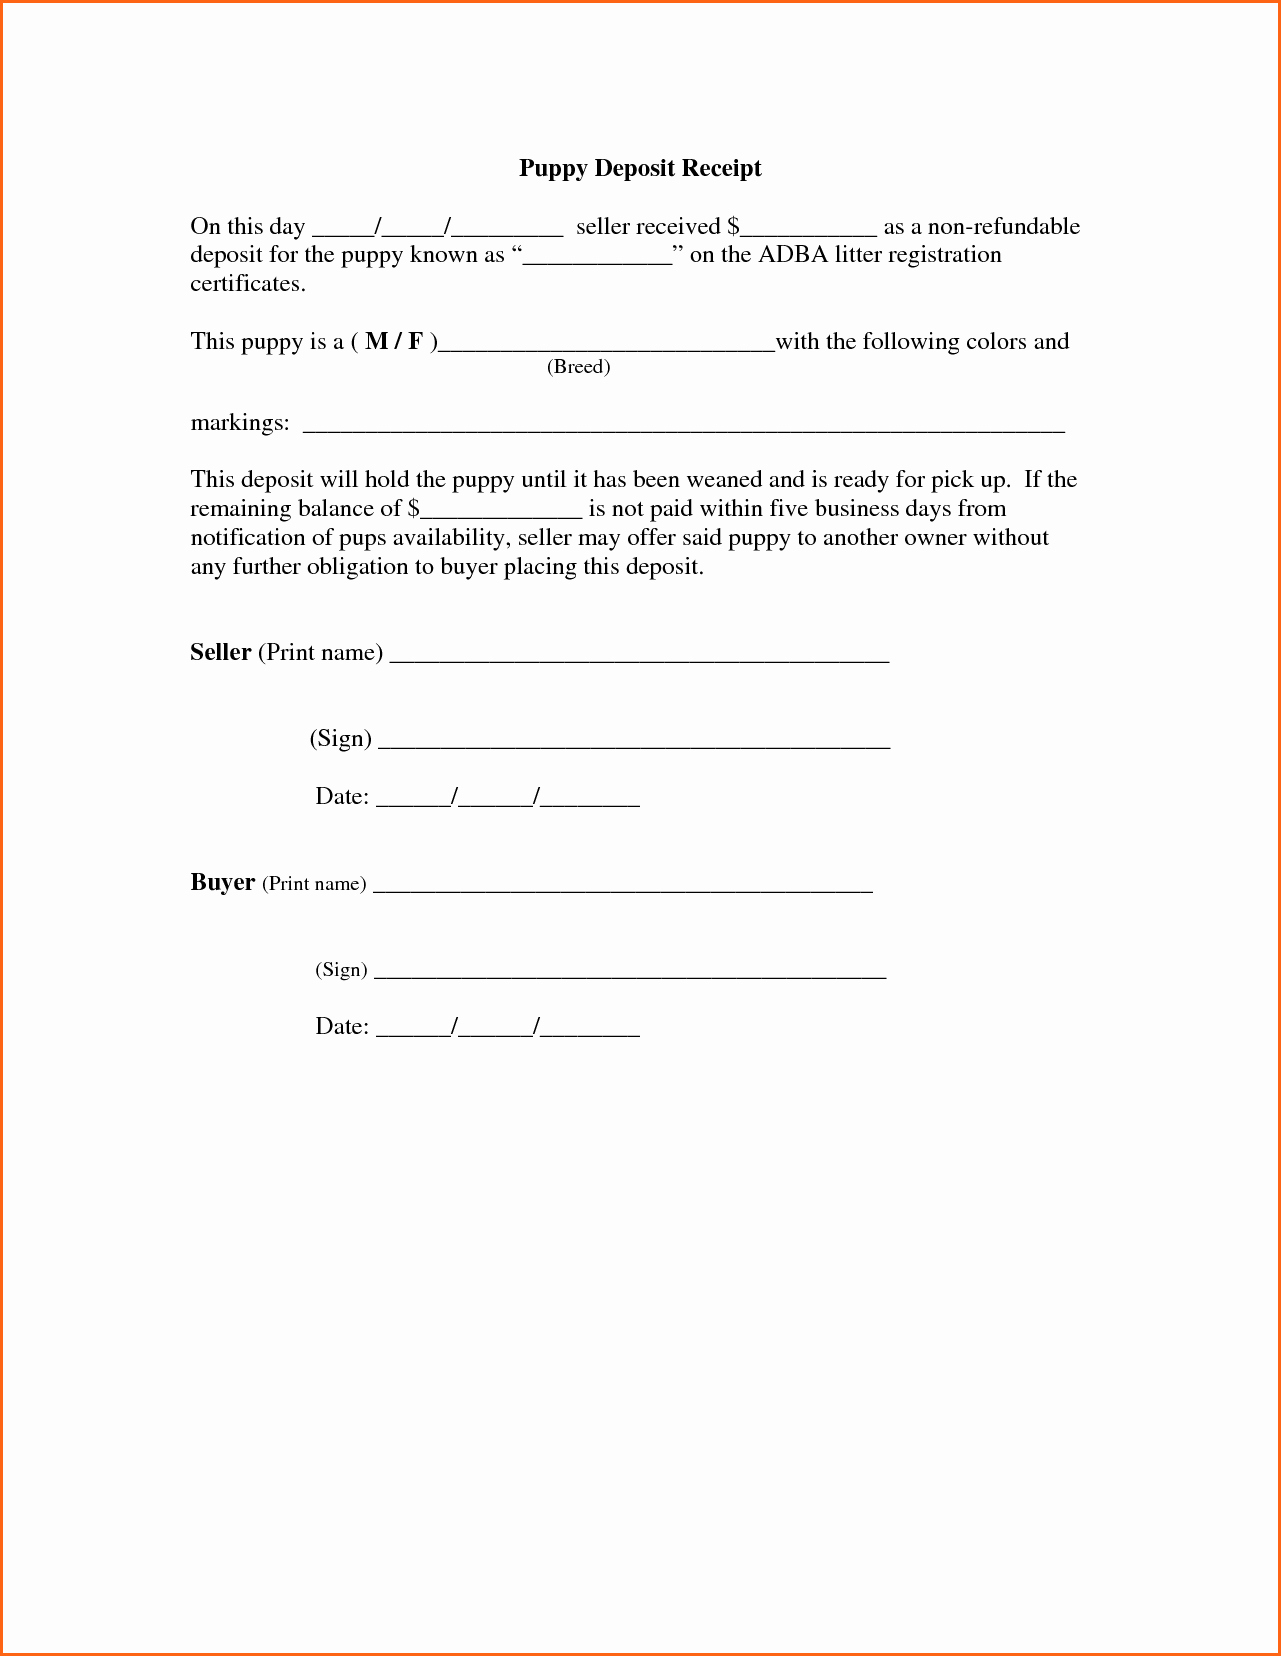 Non Refundable Deposit Agreement Template  Pictimilitude for Non Refundable Deposit Agreement Template